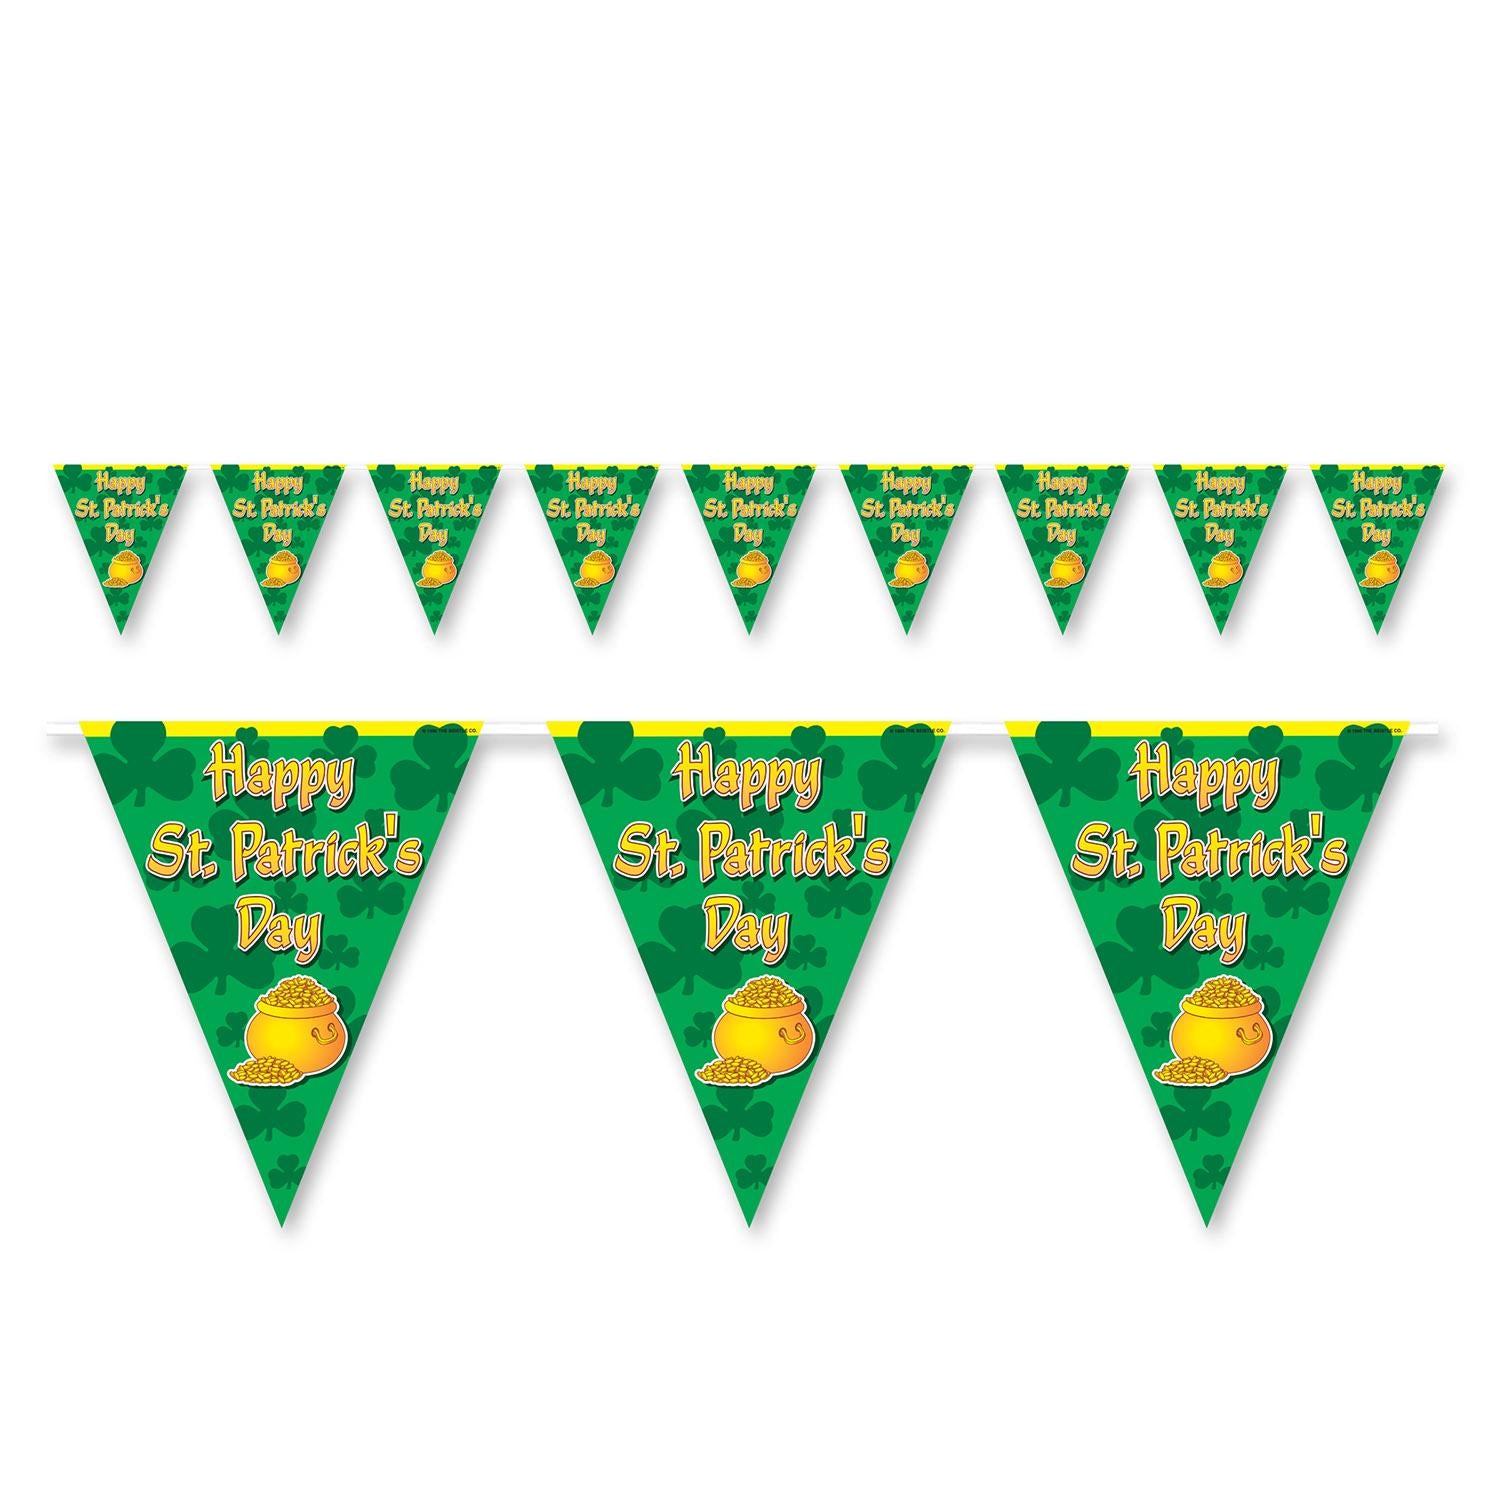 Beistle Happy St Patrick's Day Pennant Banner